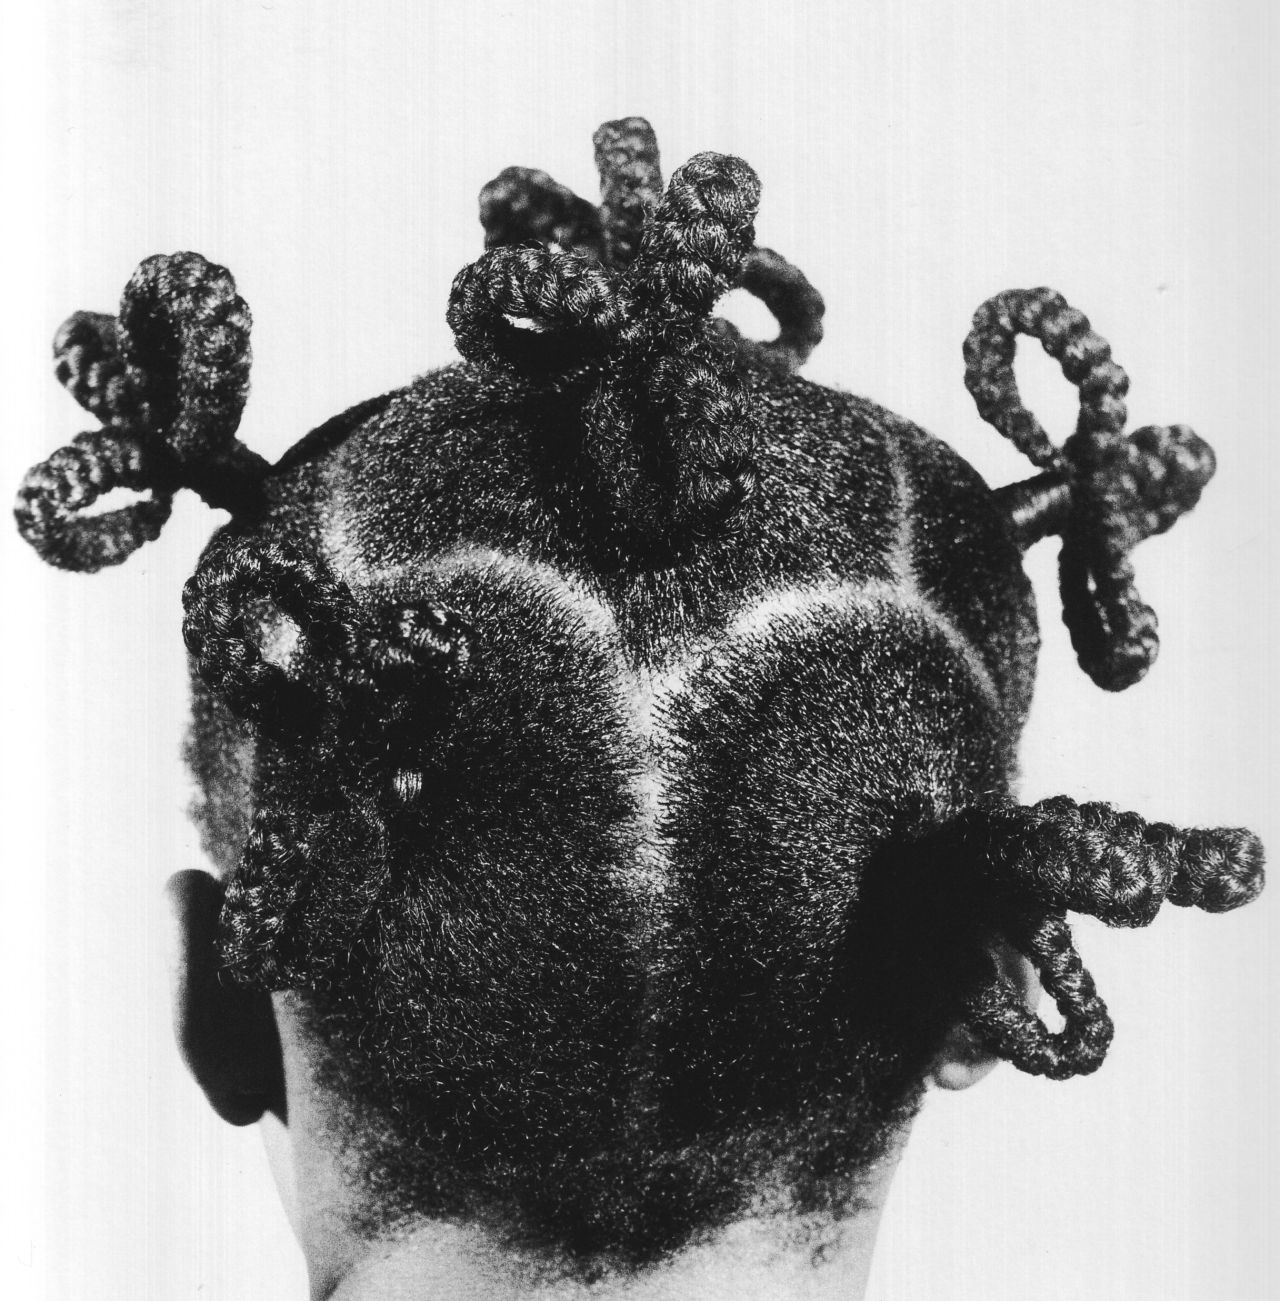 Atiai, 1970. Ojeikere's work has been described as Modernist fashion photography which documents not only hair, but a nation undergoing immense change following post-colonization.